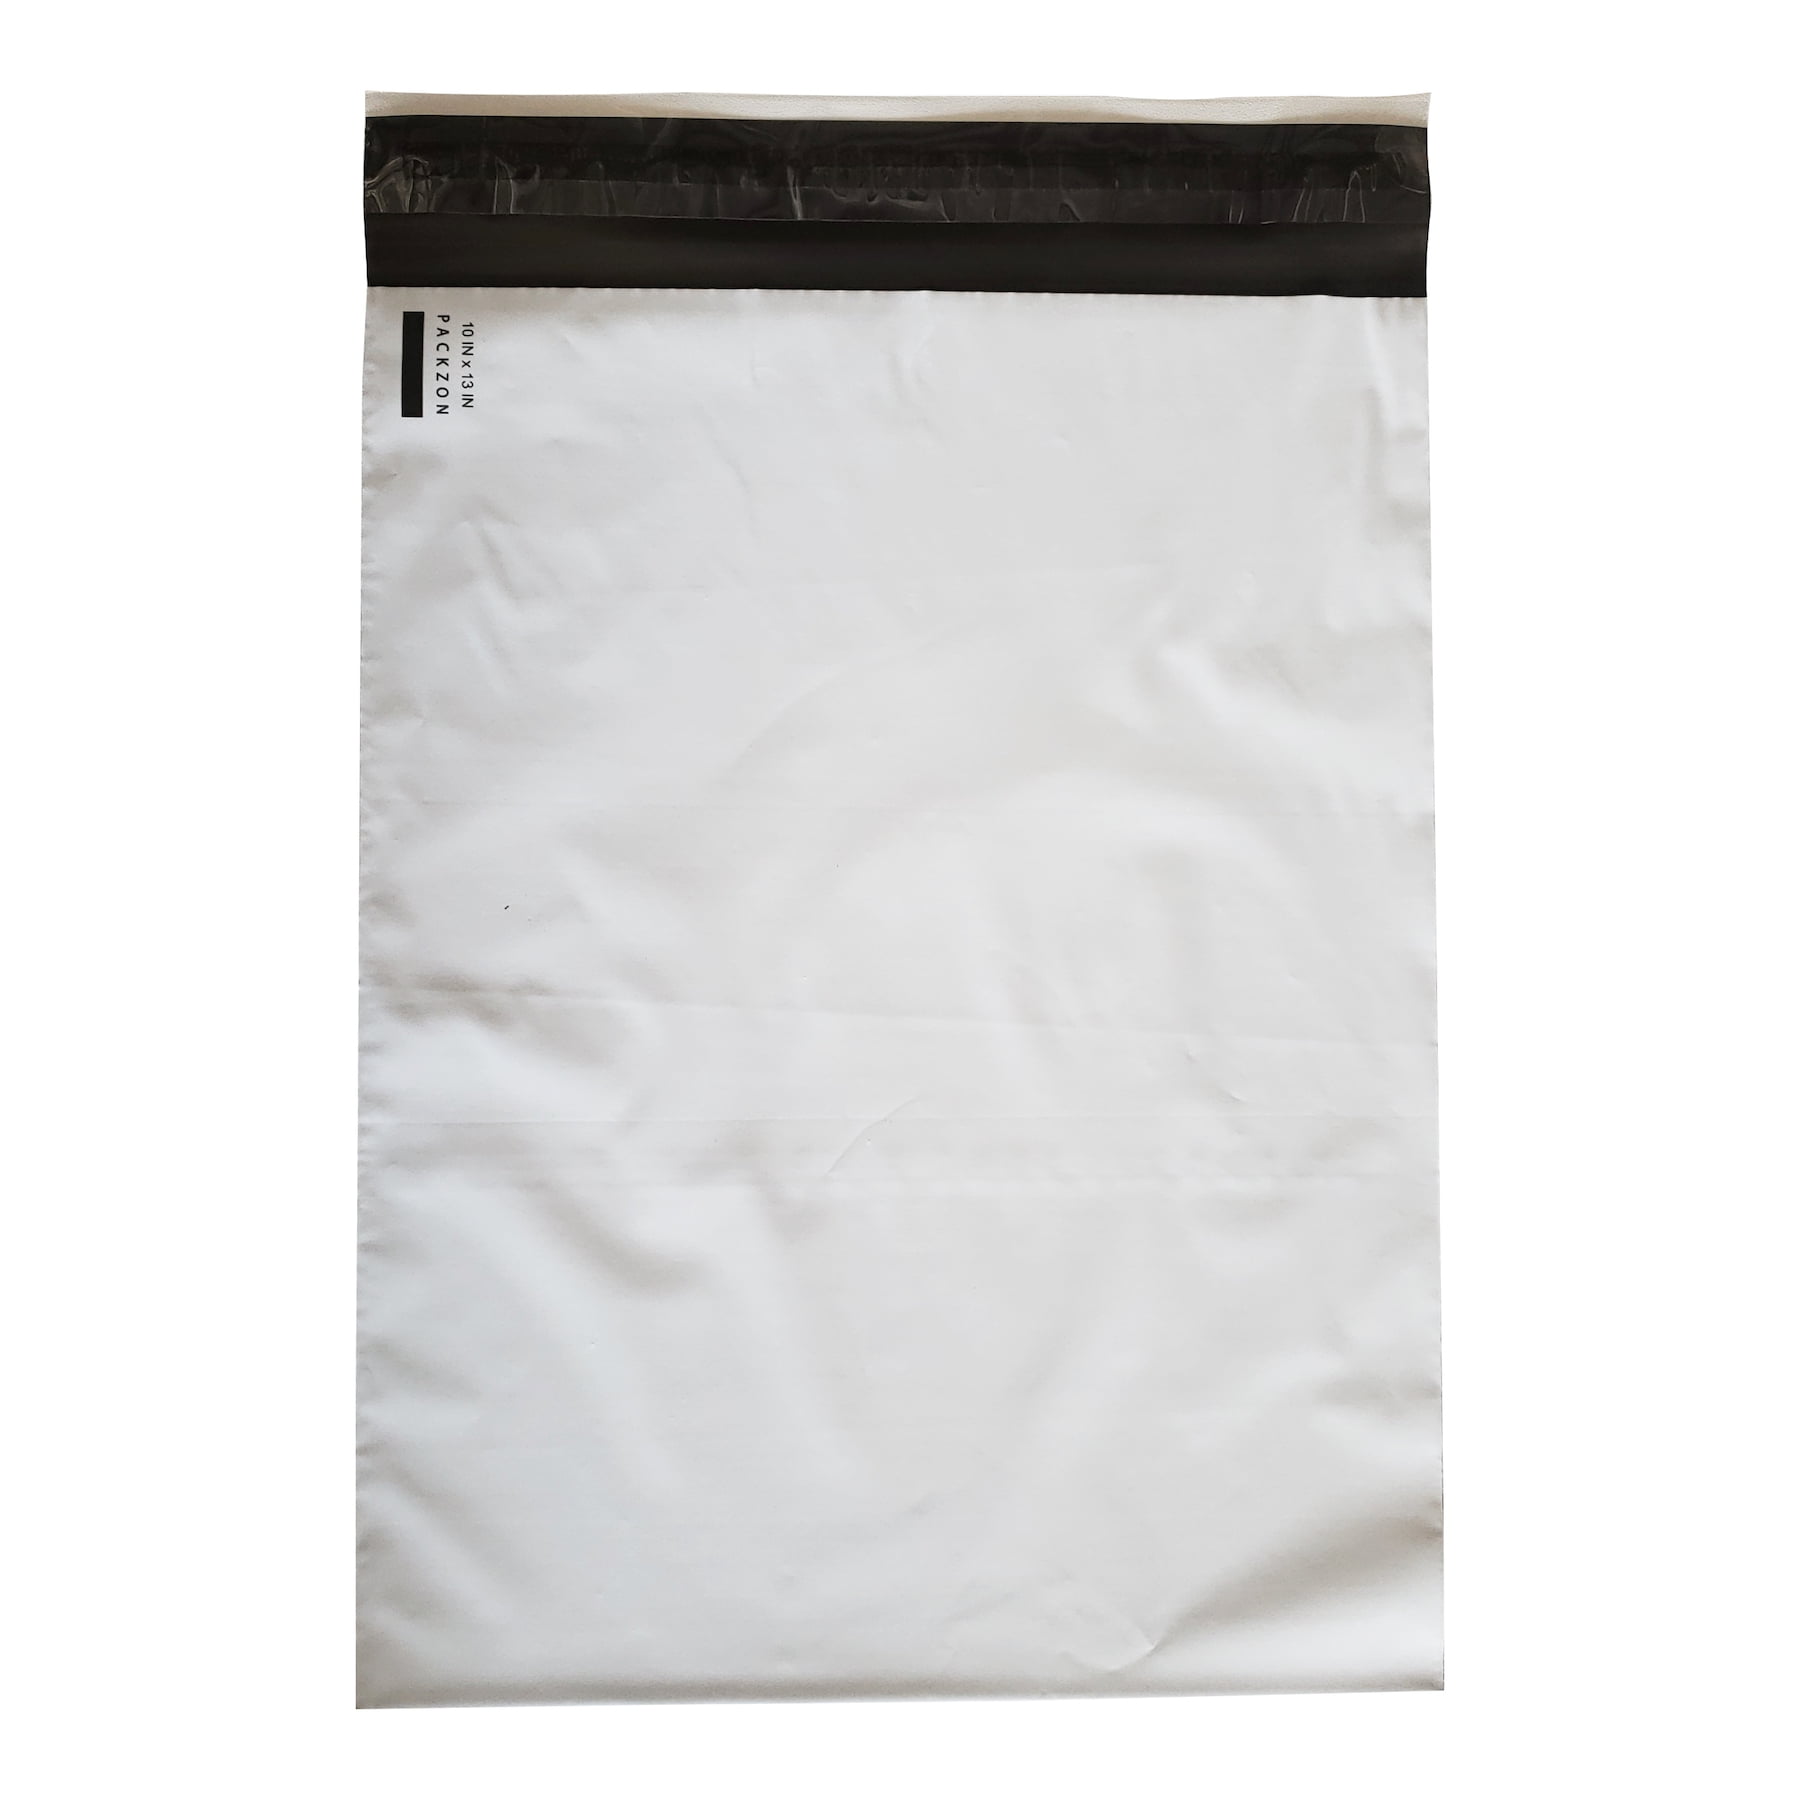 1000 10X13 M4 WHITE POLY MAILERS SHIPPING ENVELOPES PLASTIC BAGS 1000#M4 